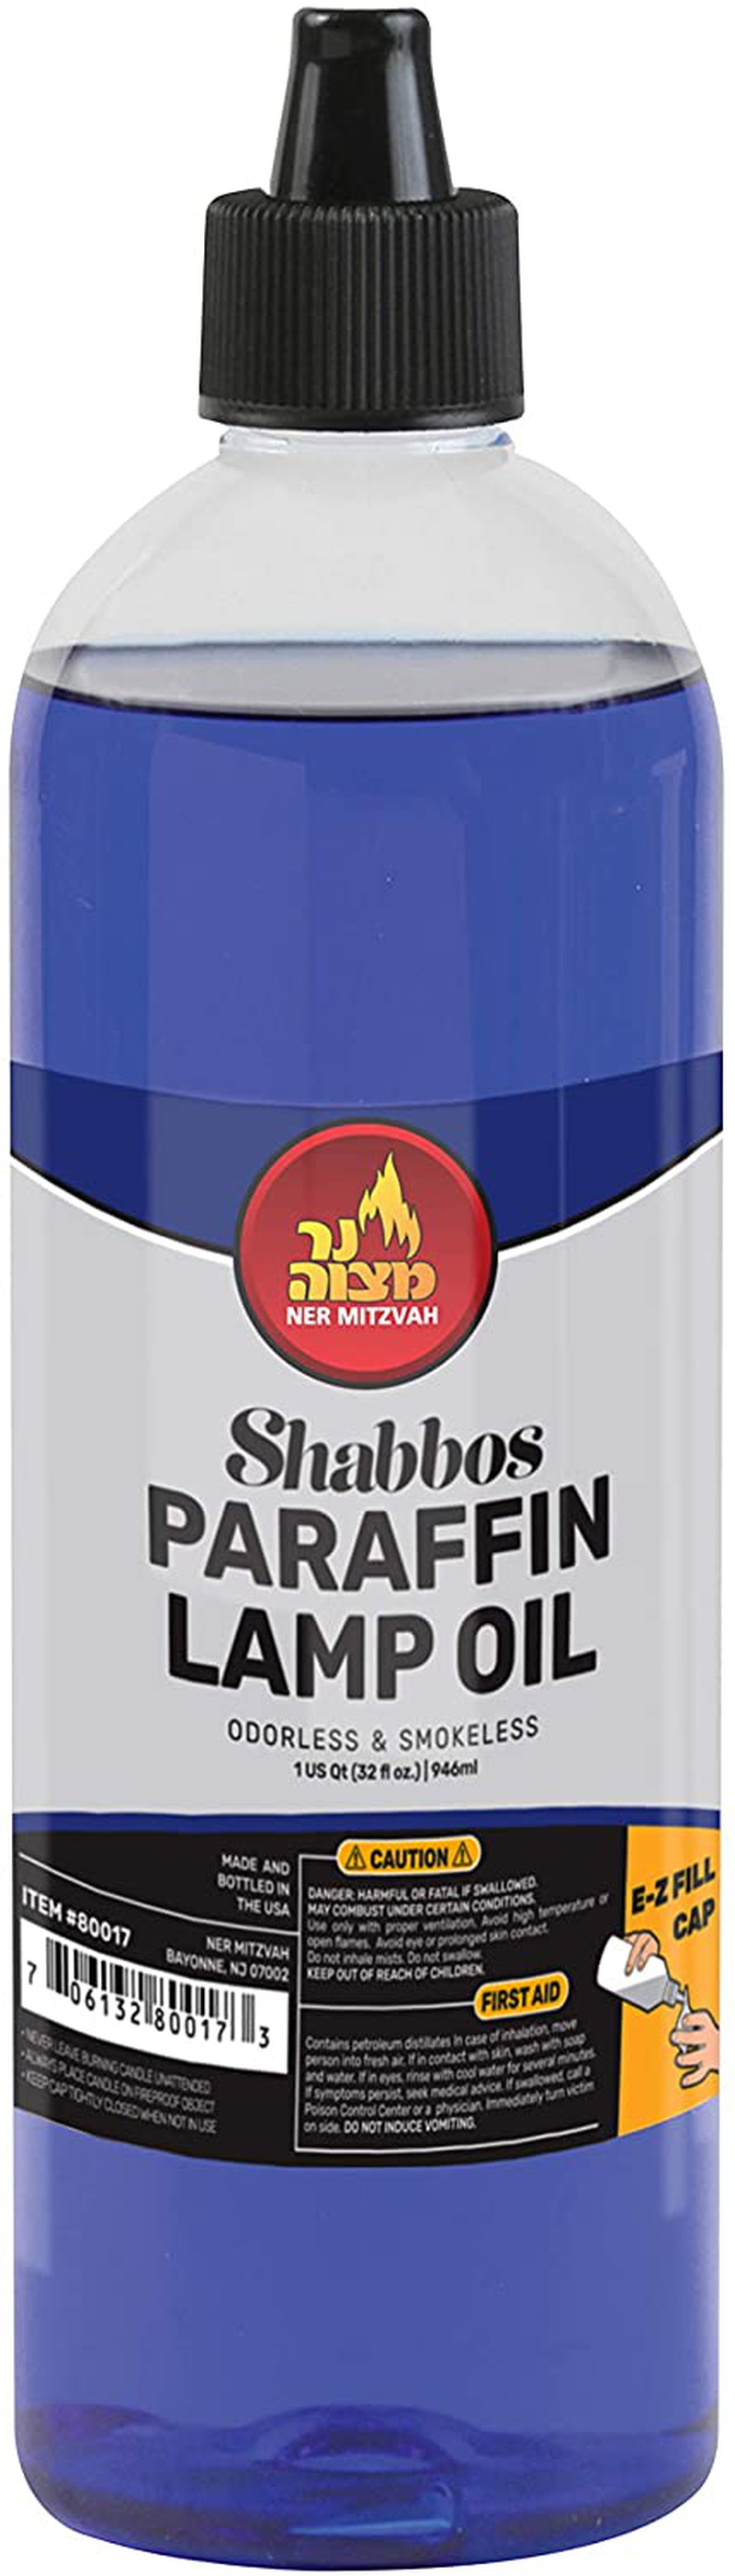 Paraffin Lamp Oil - Blue Smokeless, Odorless, Clean Burning Fuel for Indoor and Outdoor Use with E-Z Fill Cap and Pouring Spout - 32oz - by Ner Mitzvah Home & Garden > Lighting Accessories > Oil Lamp Fuel Ner Mitzvah Default Title  